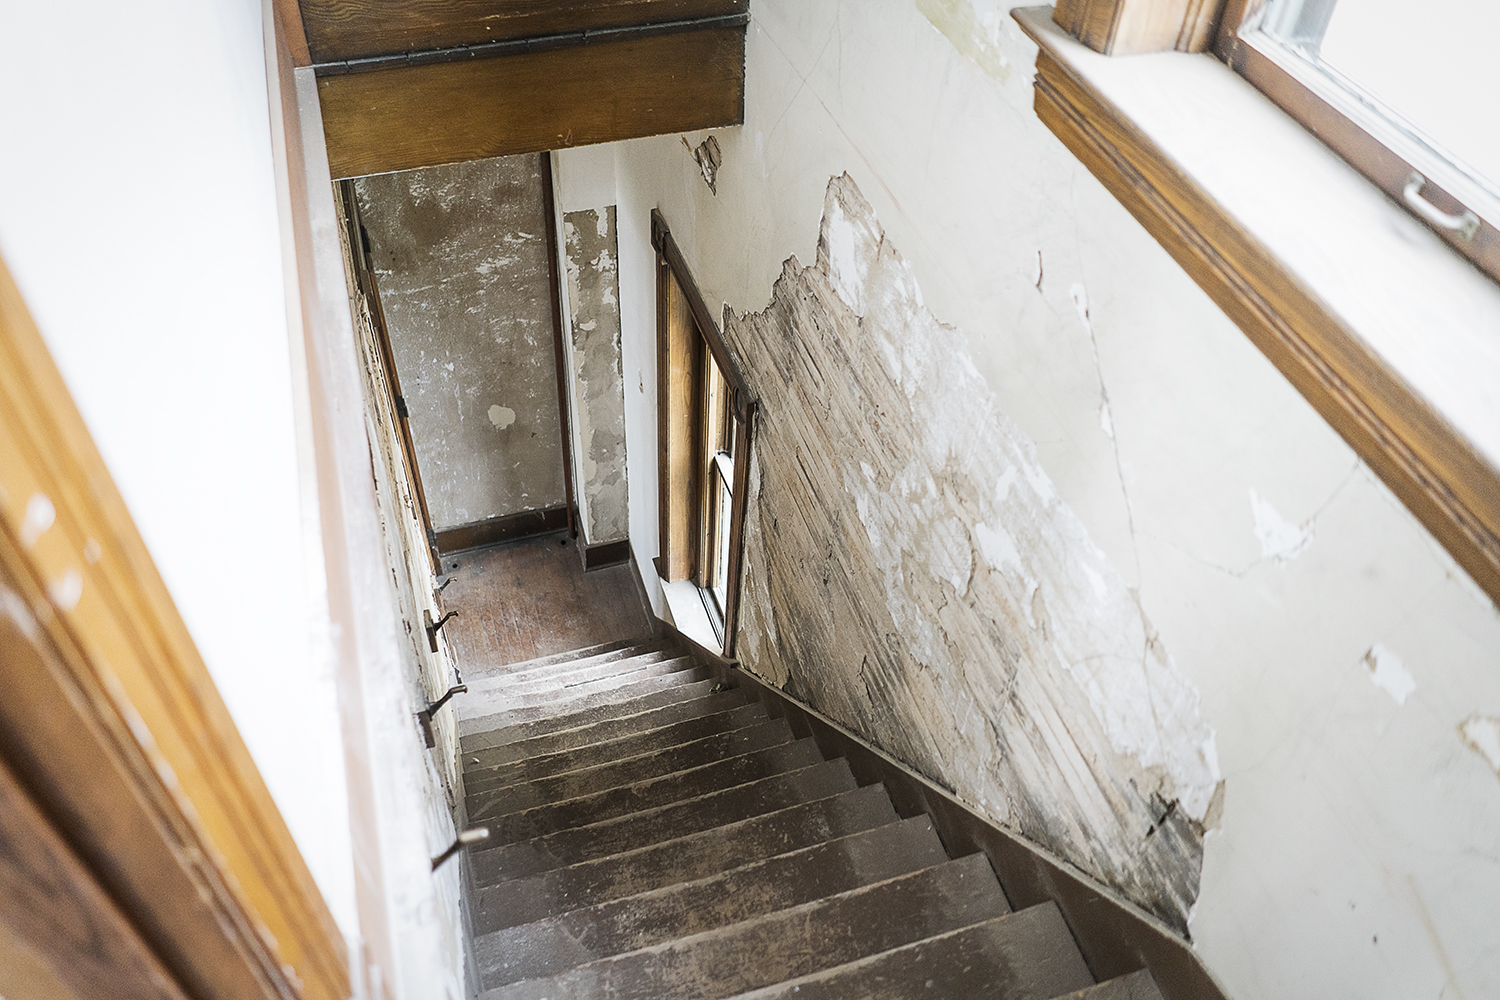 Flint, MI - Tuesday, October 31, 2017: A secondary staircase drops down to the first floor of the Whaley Historic House Museum. 